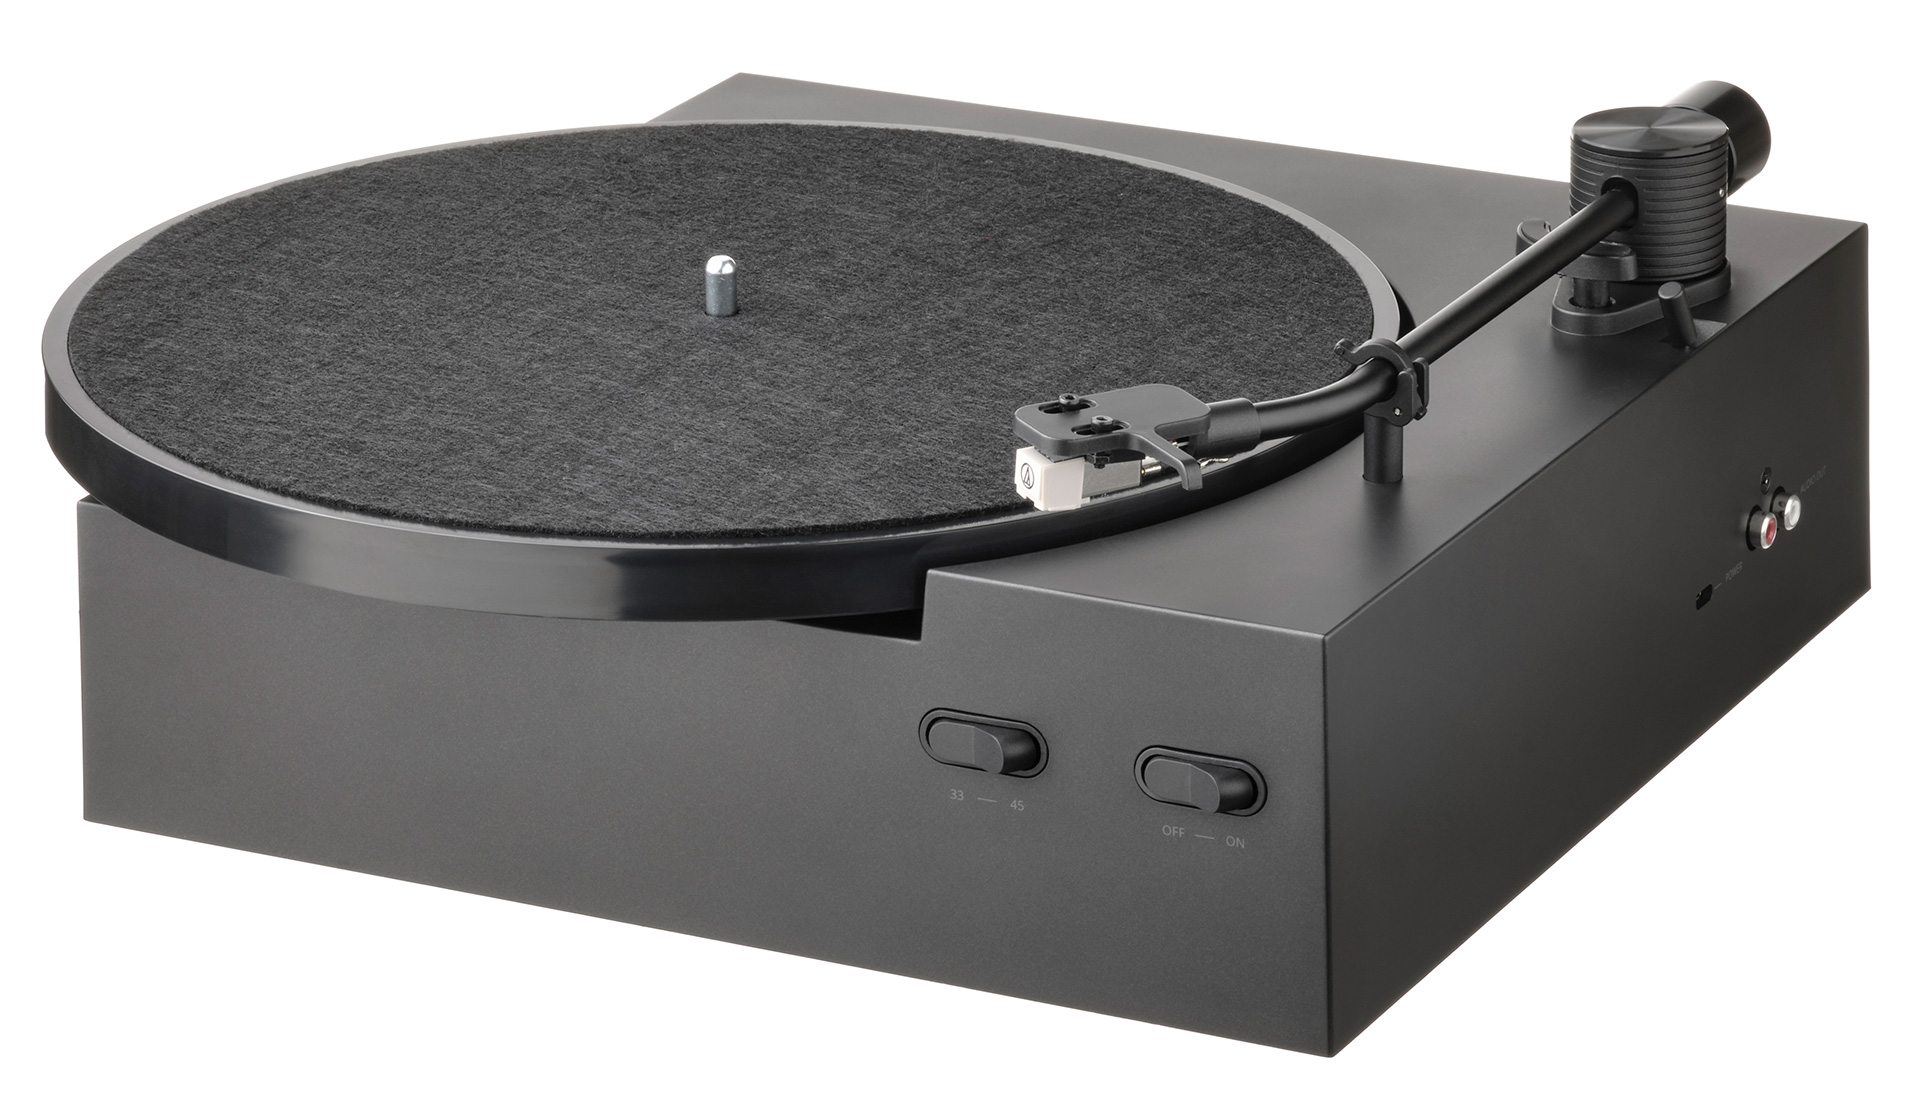 IKEA teamed up with Swedish House Mafia on a record player